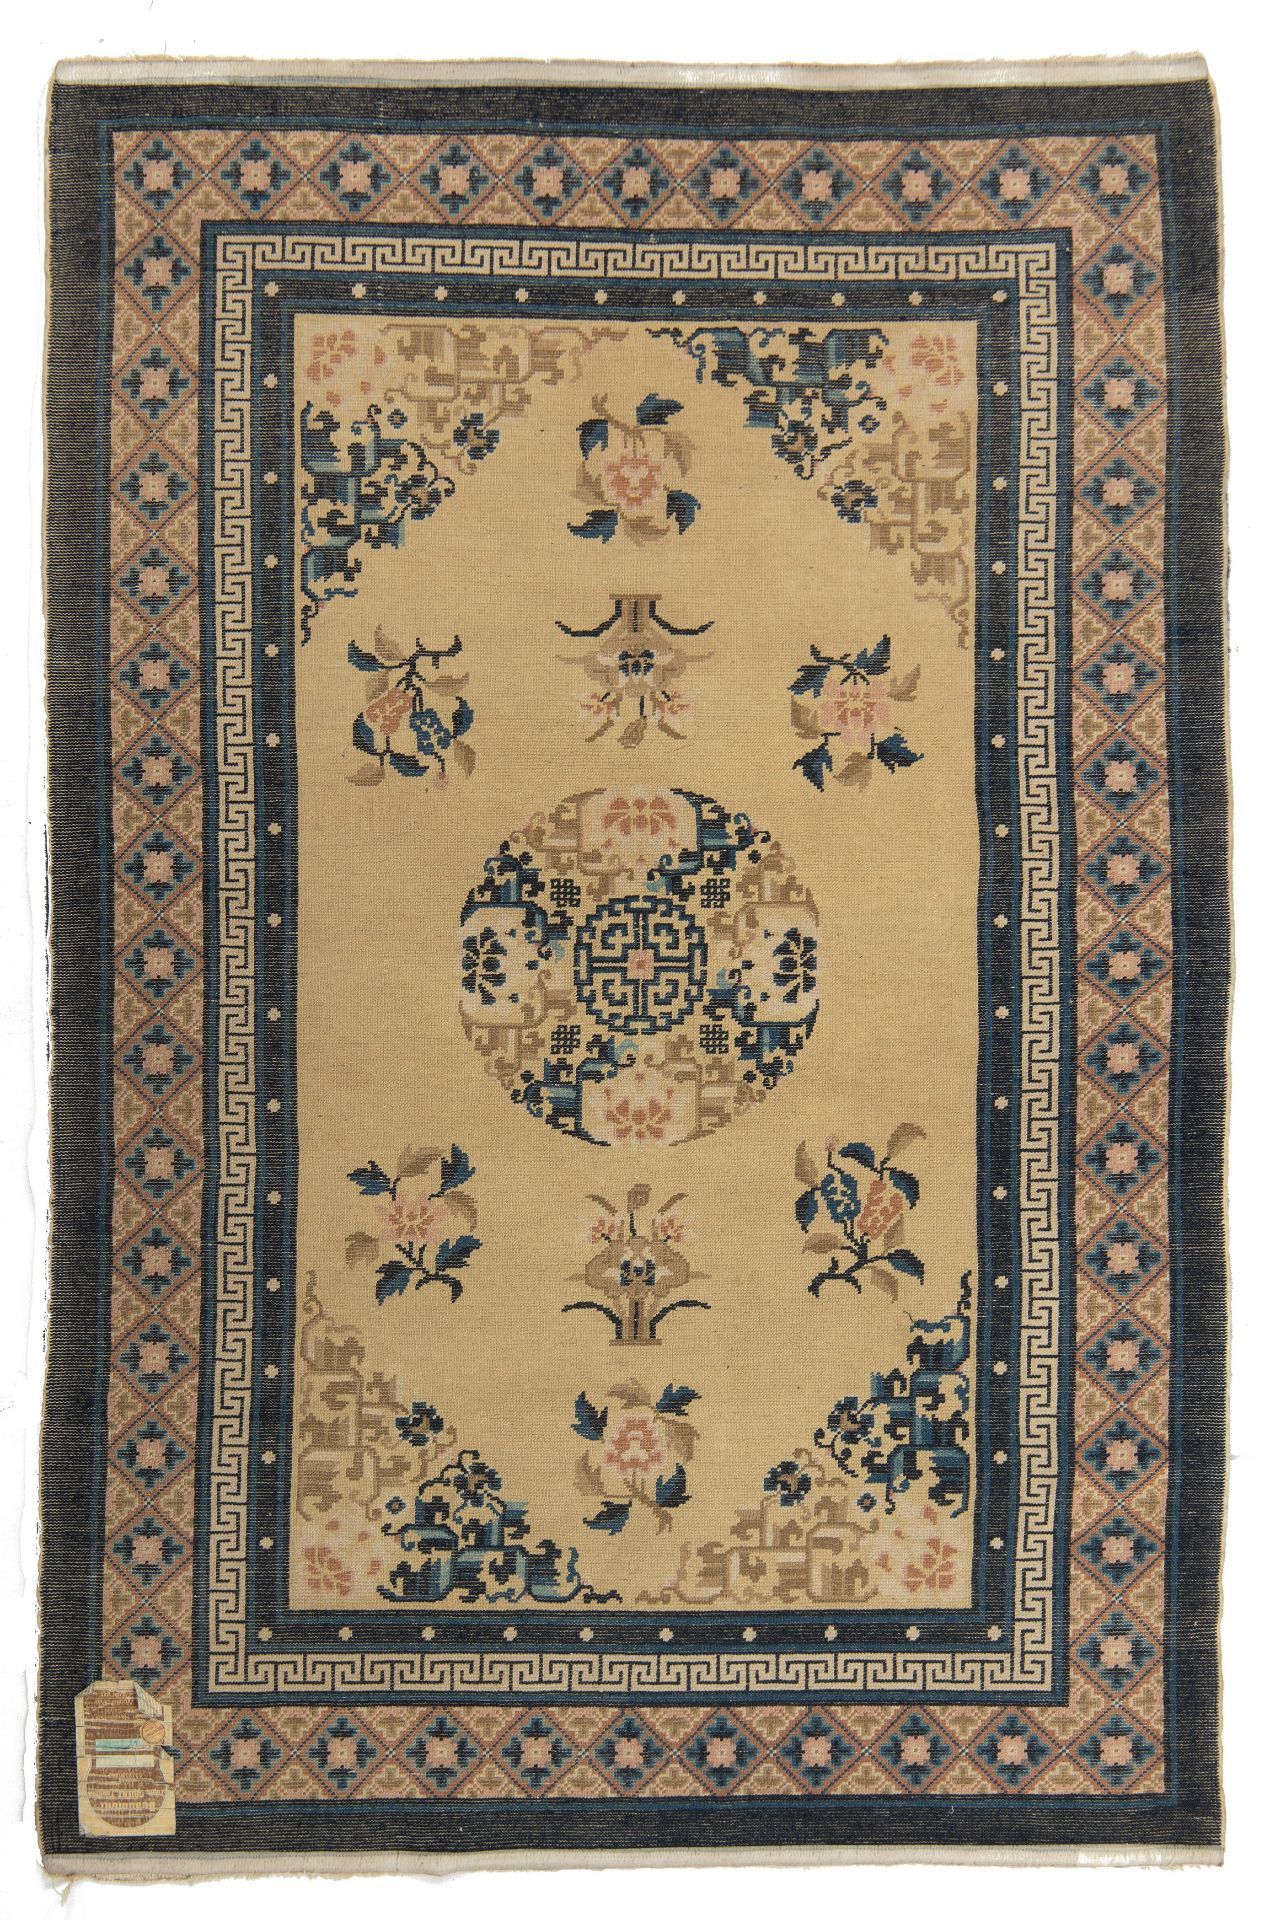 (BIDDING ONLY ON CARLOBONTE.BE) A Chinese woollen carpet, decorated with a central medaillon, 123,5 - Image 2 of 4